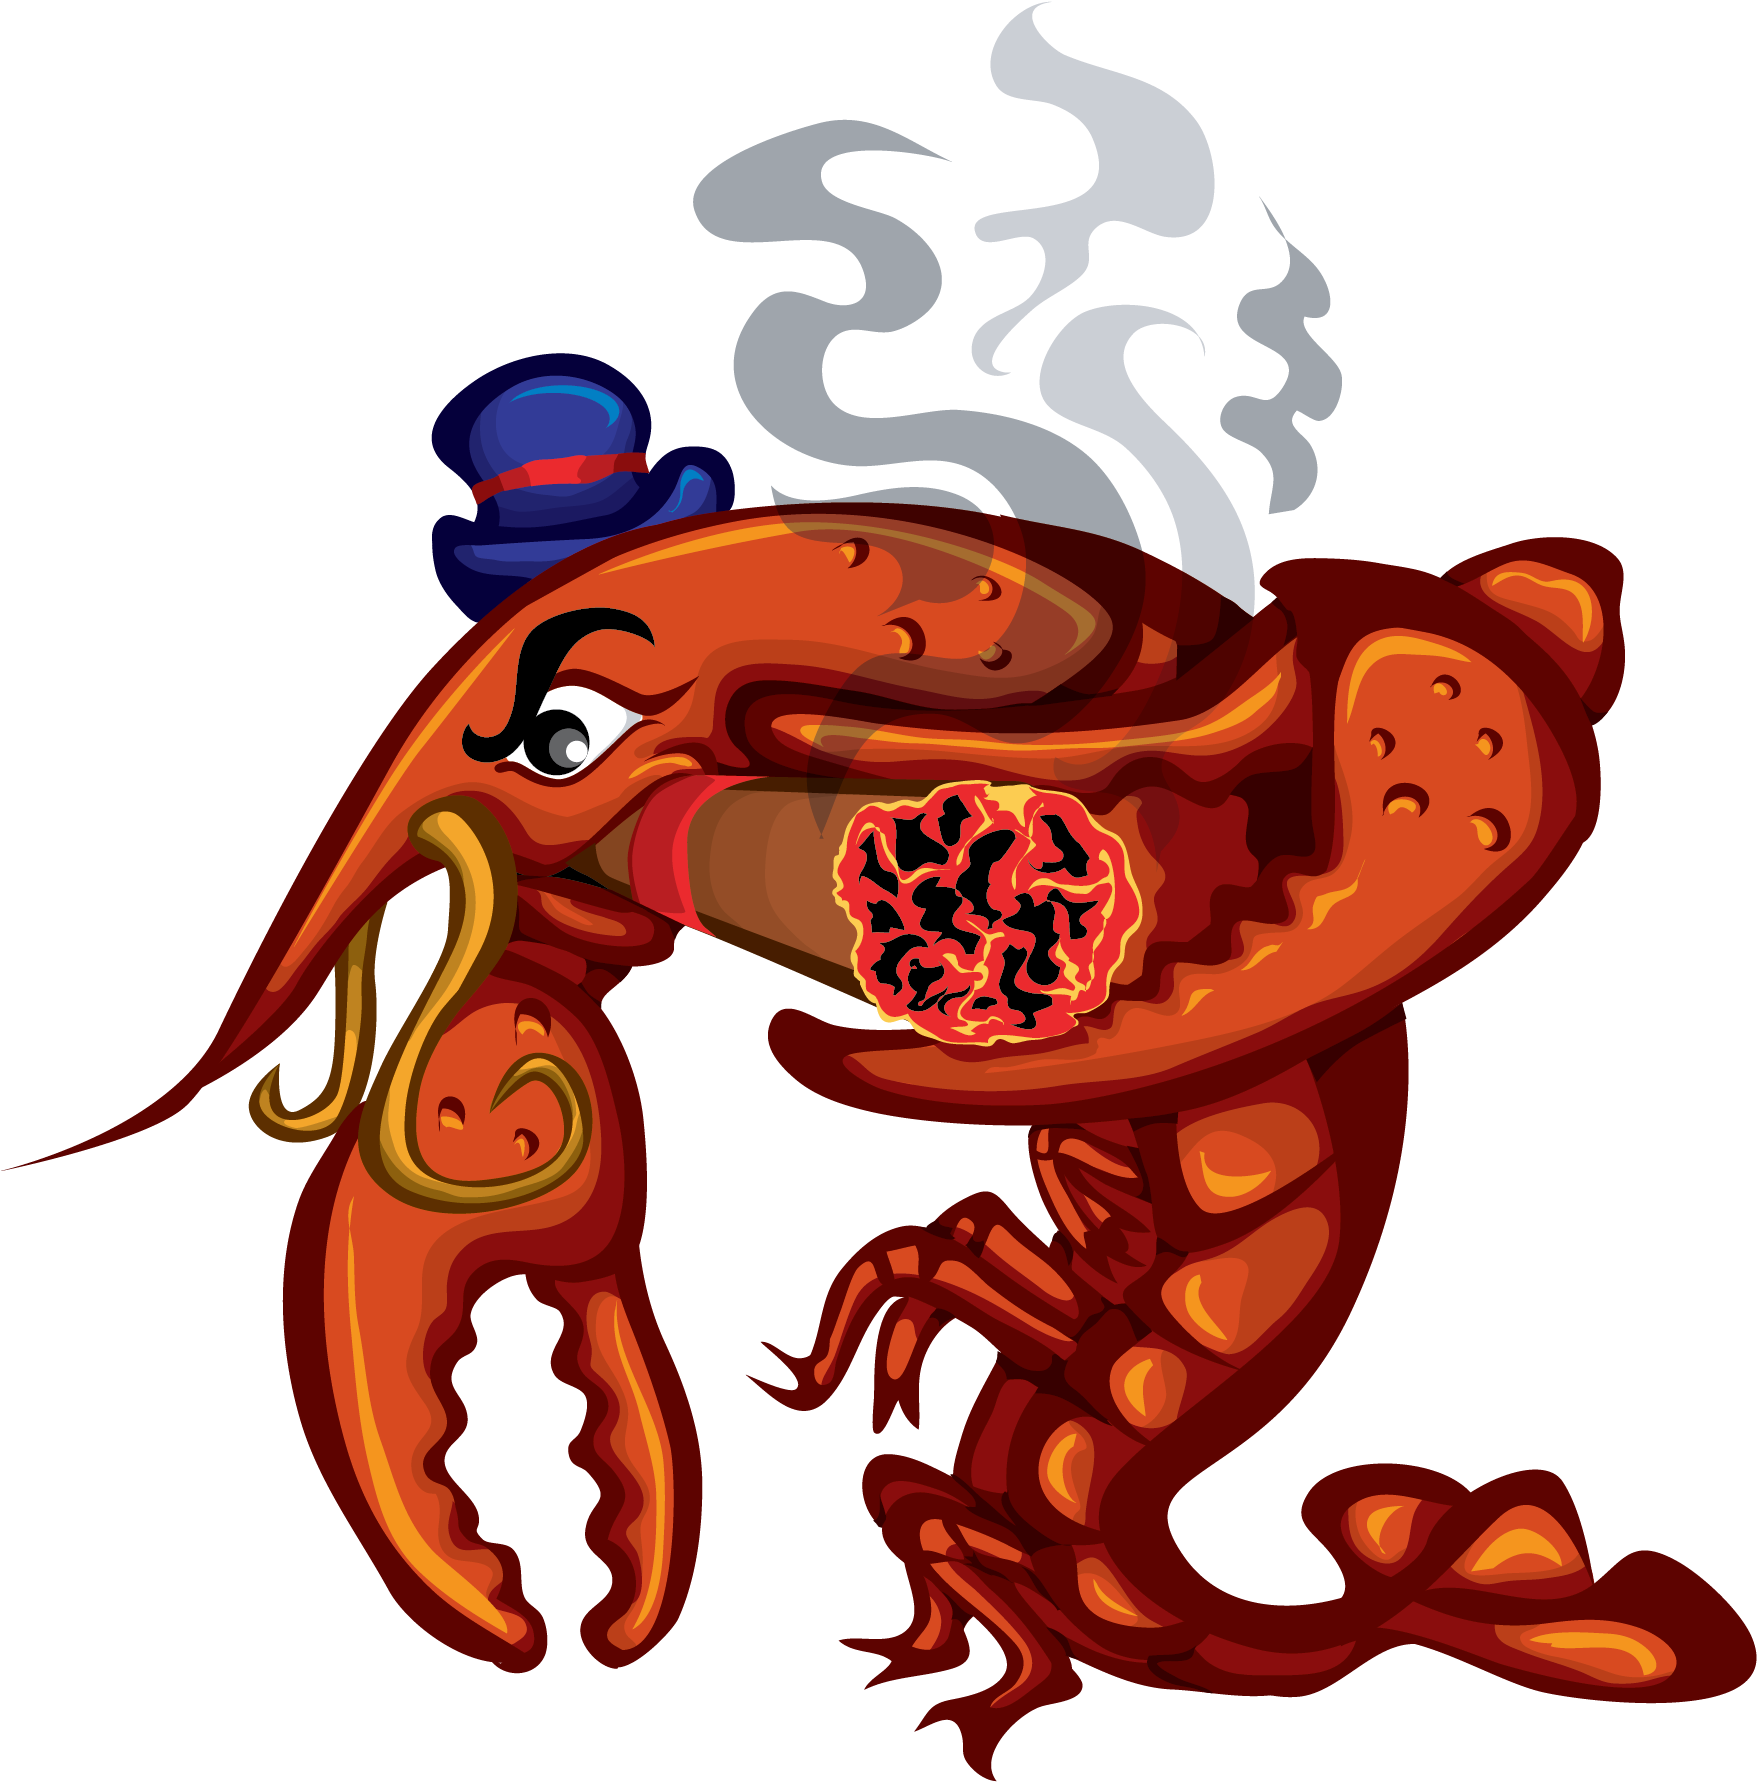 Cartoon Crab With A Cigar In Its Mouth